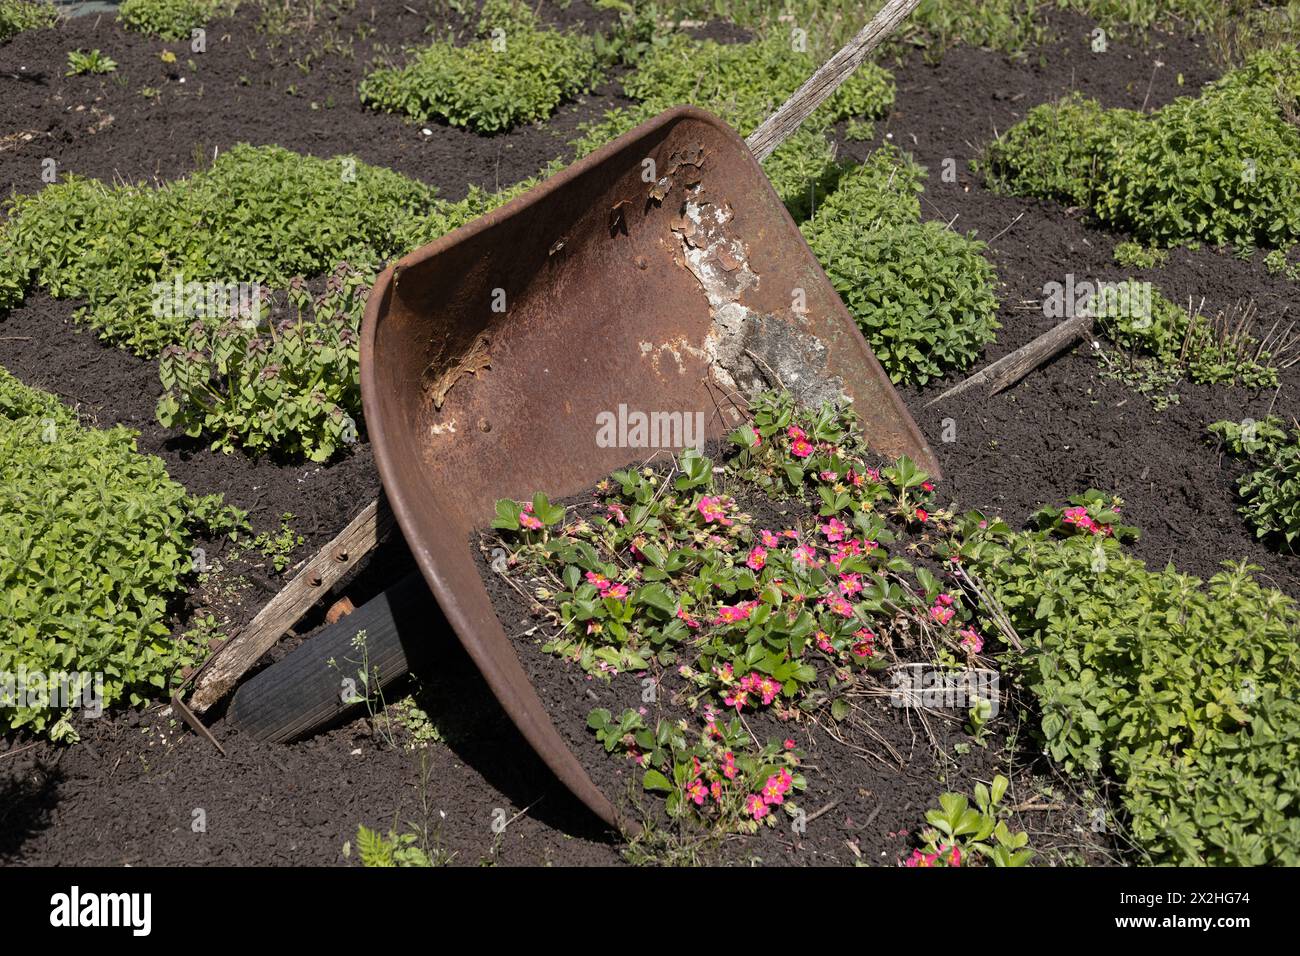 A tipped over wheelbarrow in a garden serving as a container for flowers. Stock Photo